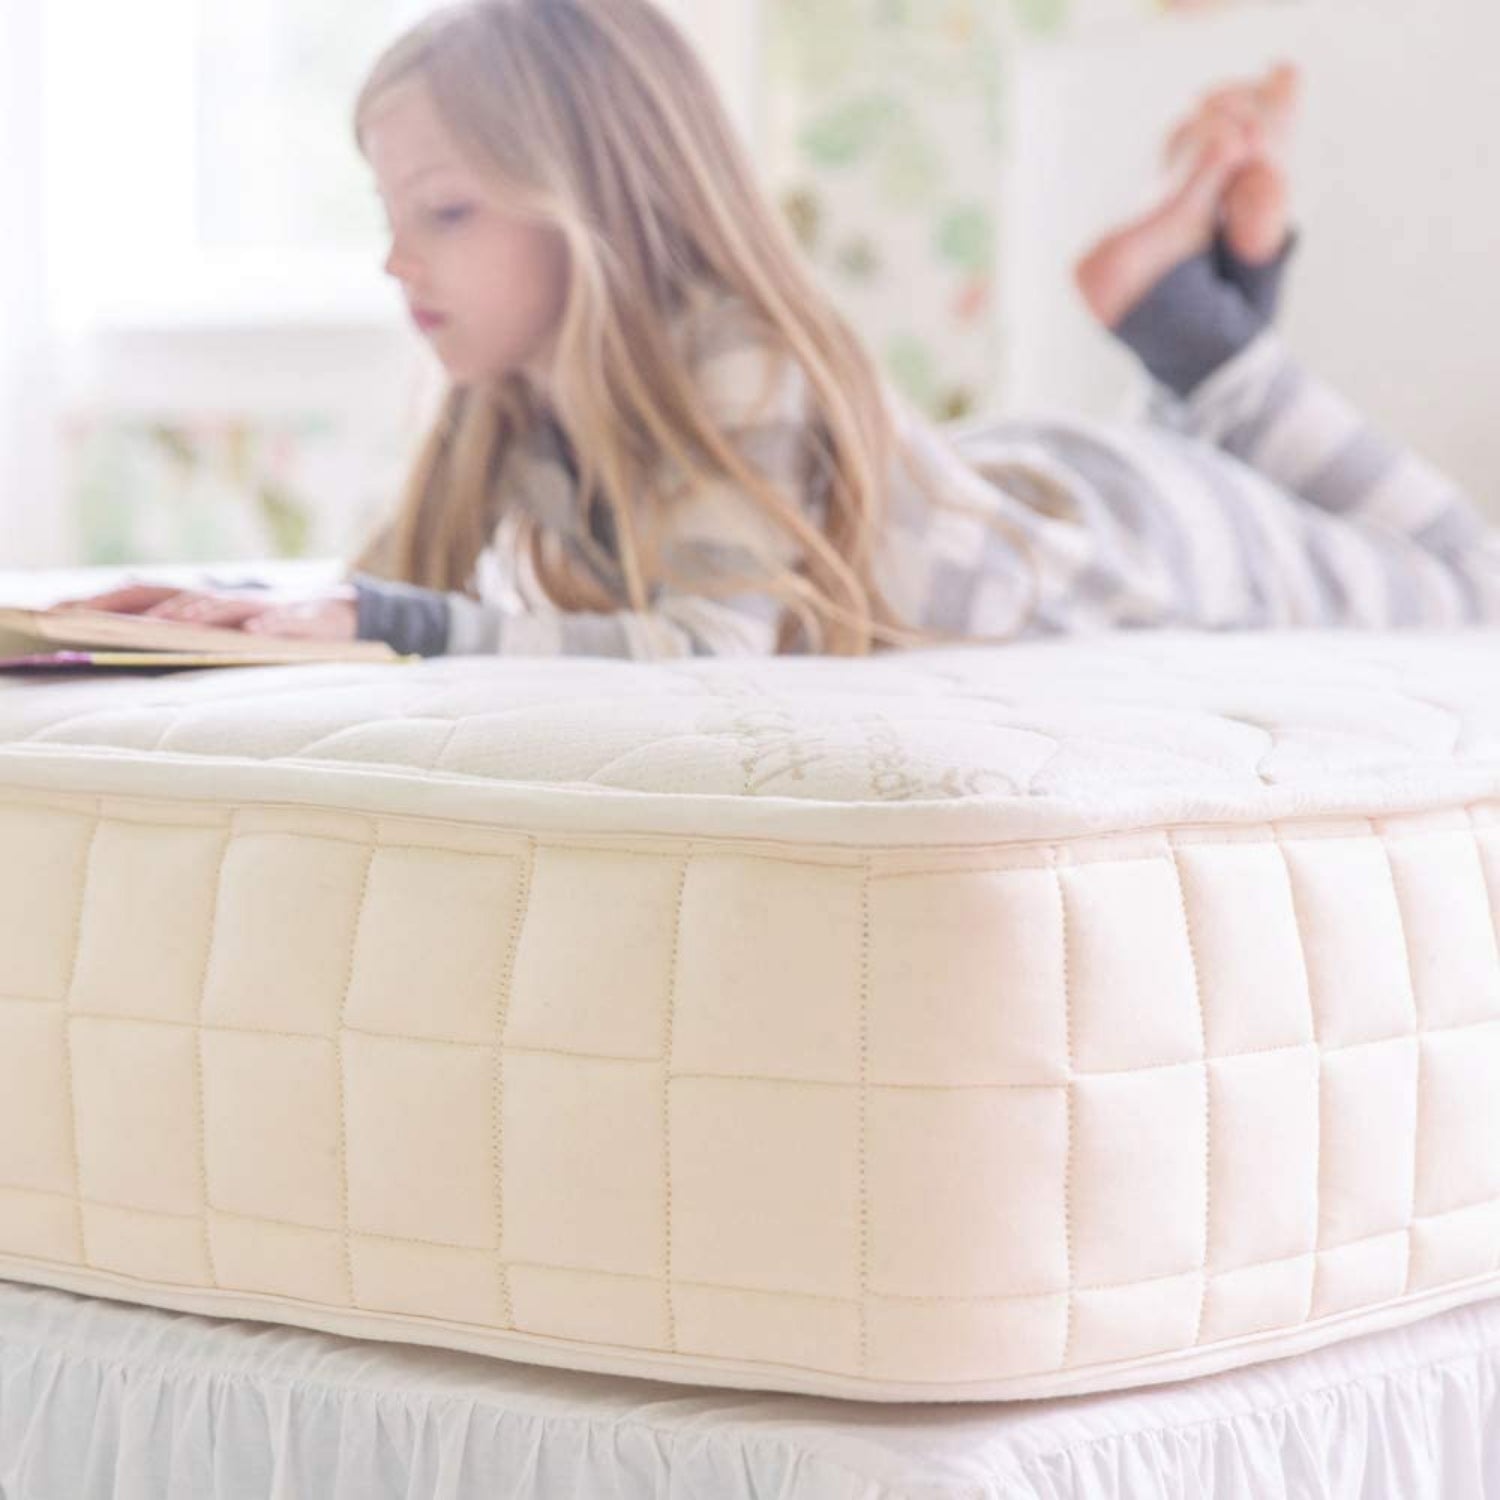 Naturepedic Verse Organic Kids Mattress, Firm Natural Mattress with Quilted Top, Non-Toxic, Twin Siz